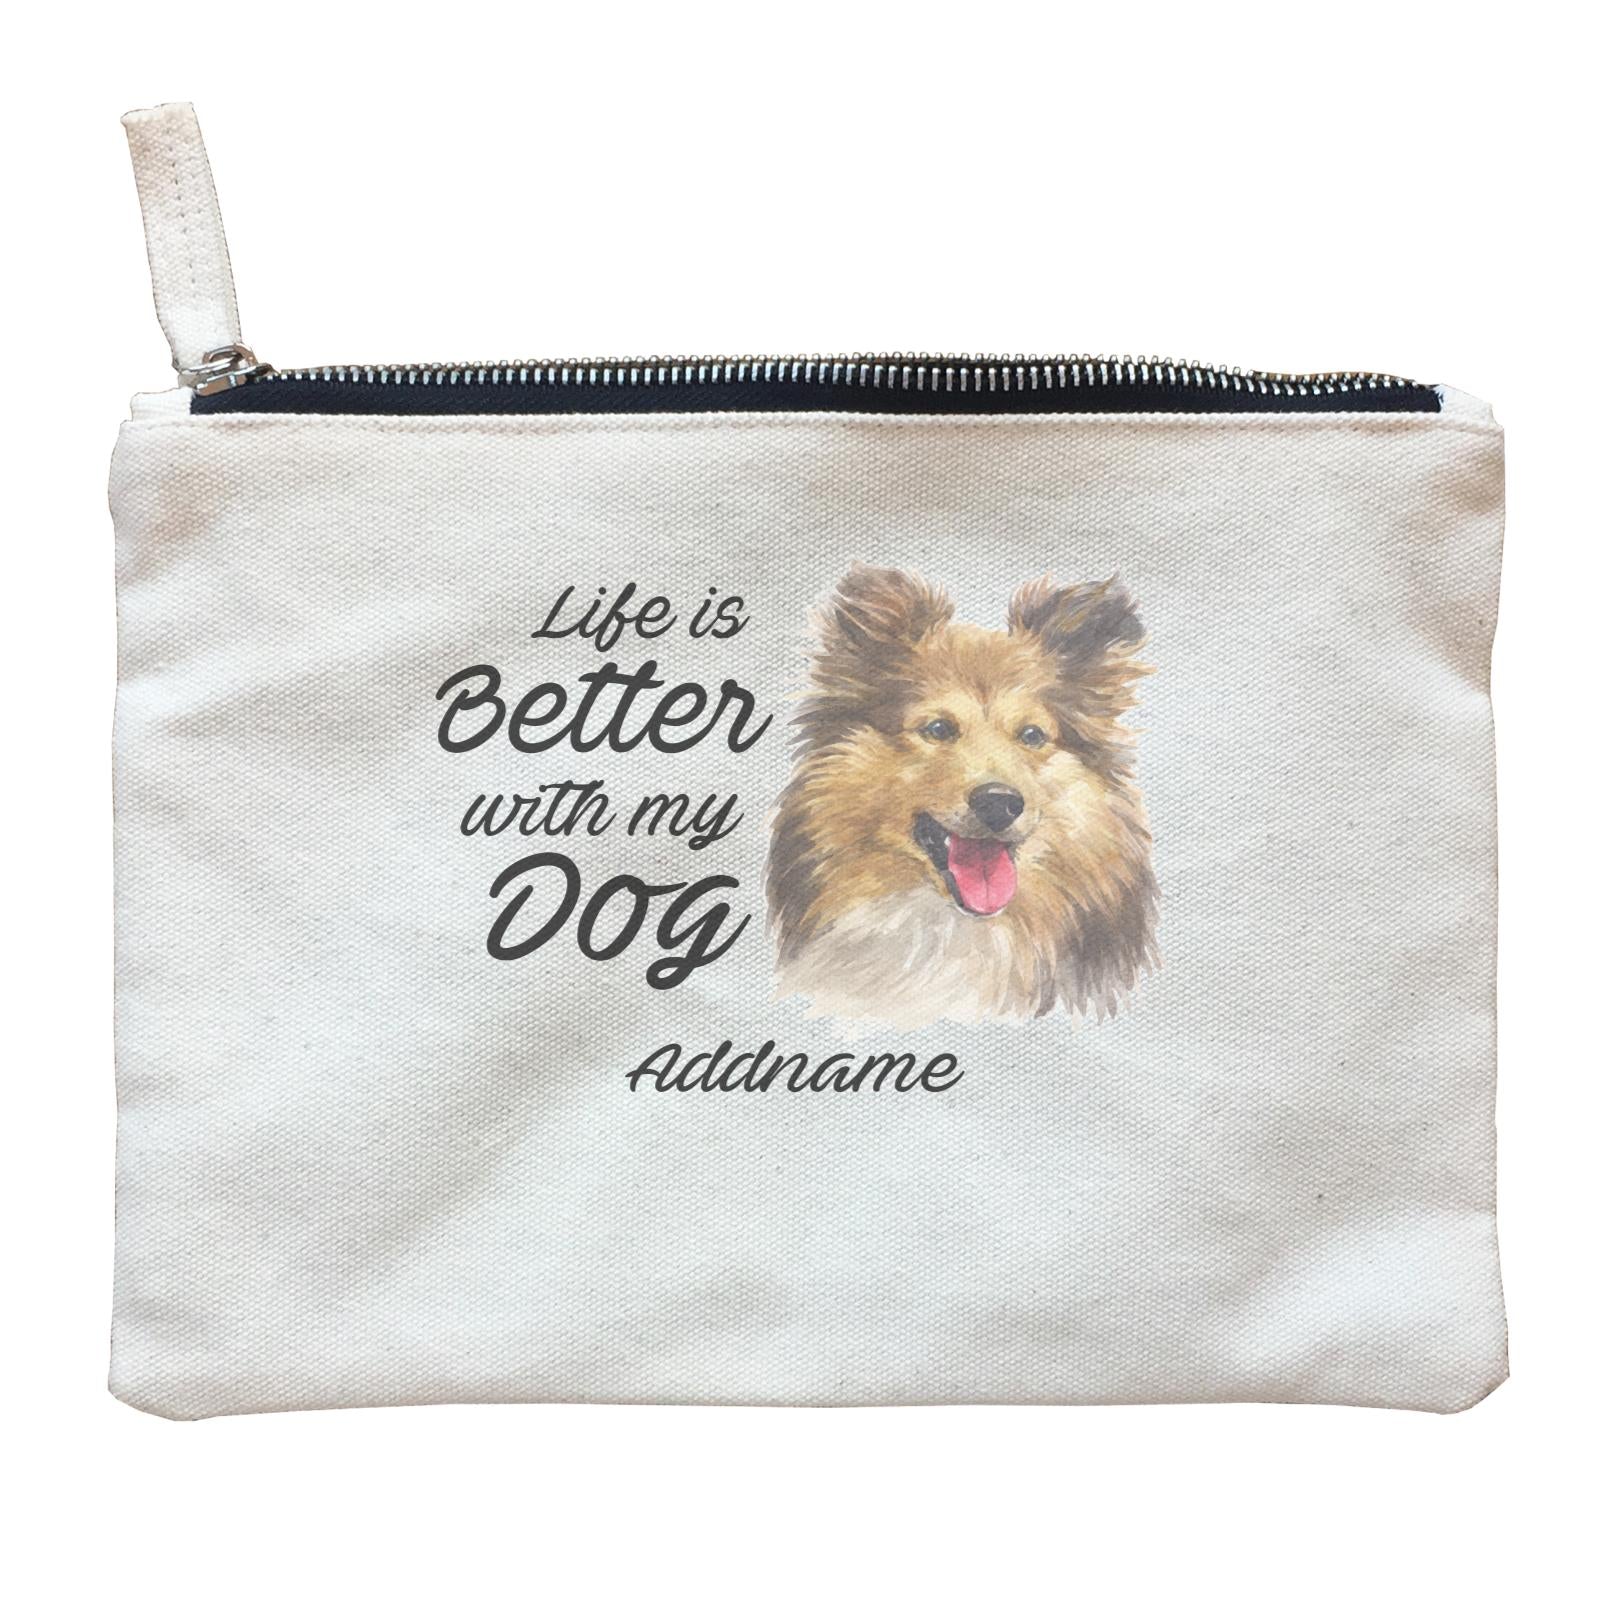 Watercolor Life is Better With My Dog Shetland Sheepdog Addname Zipper Pouch